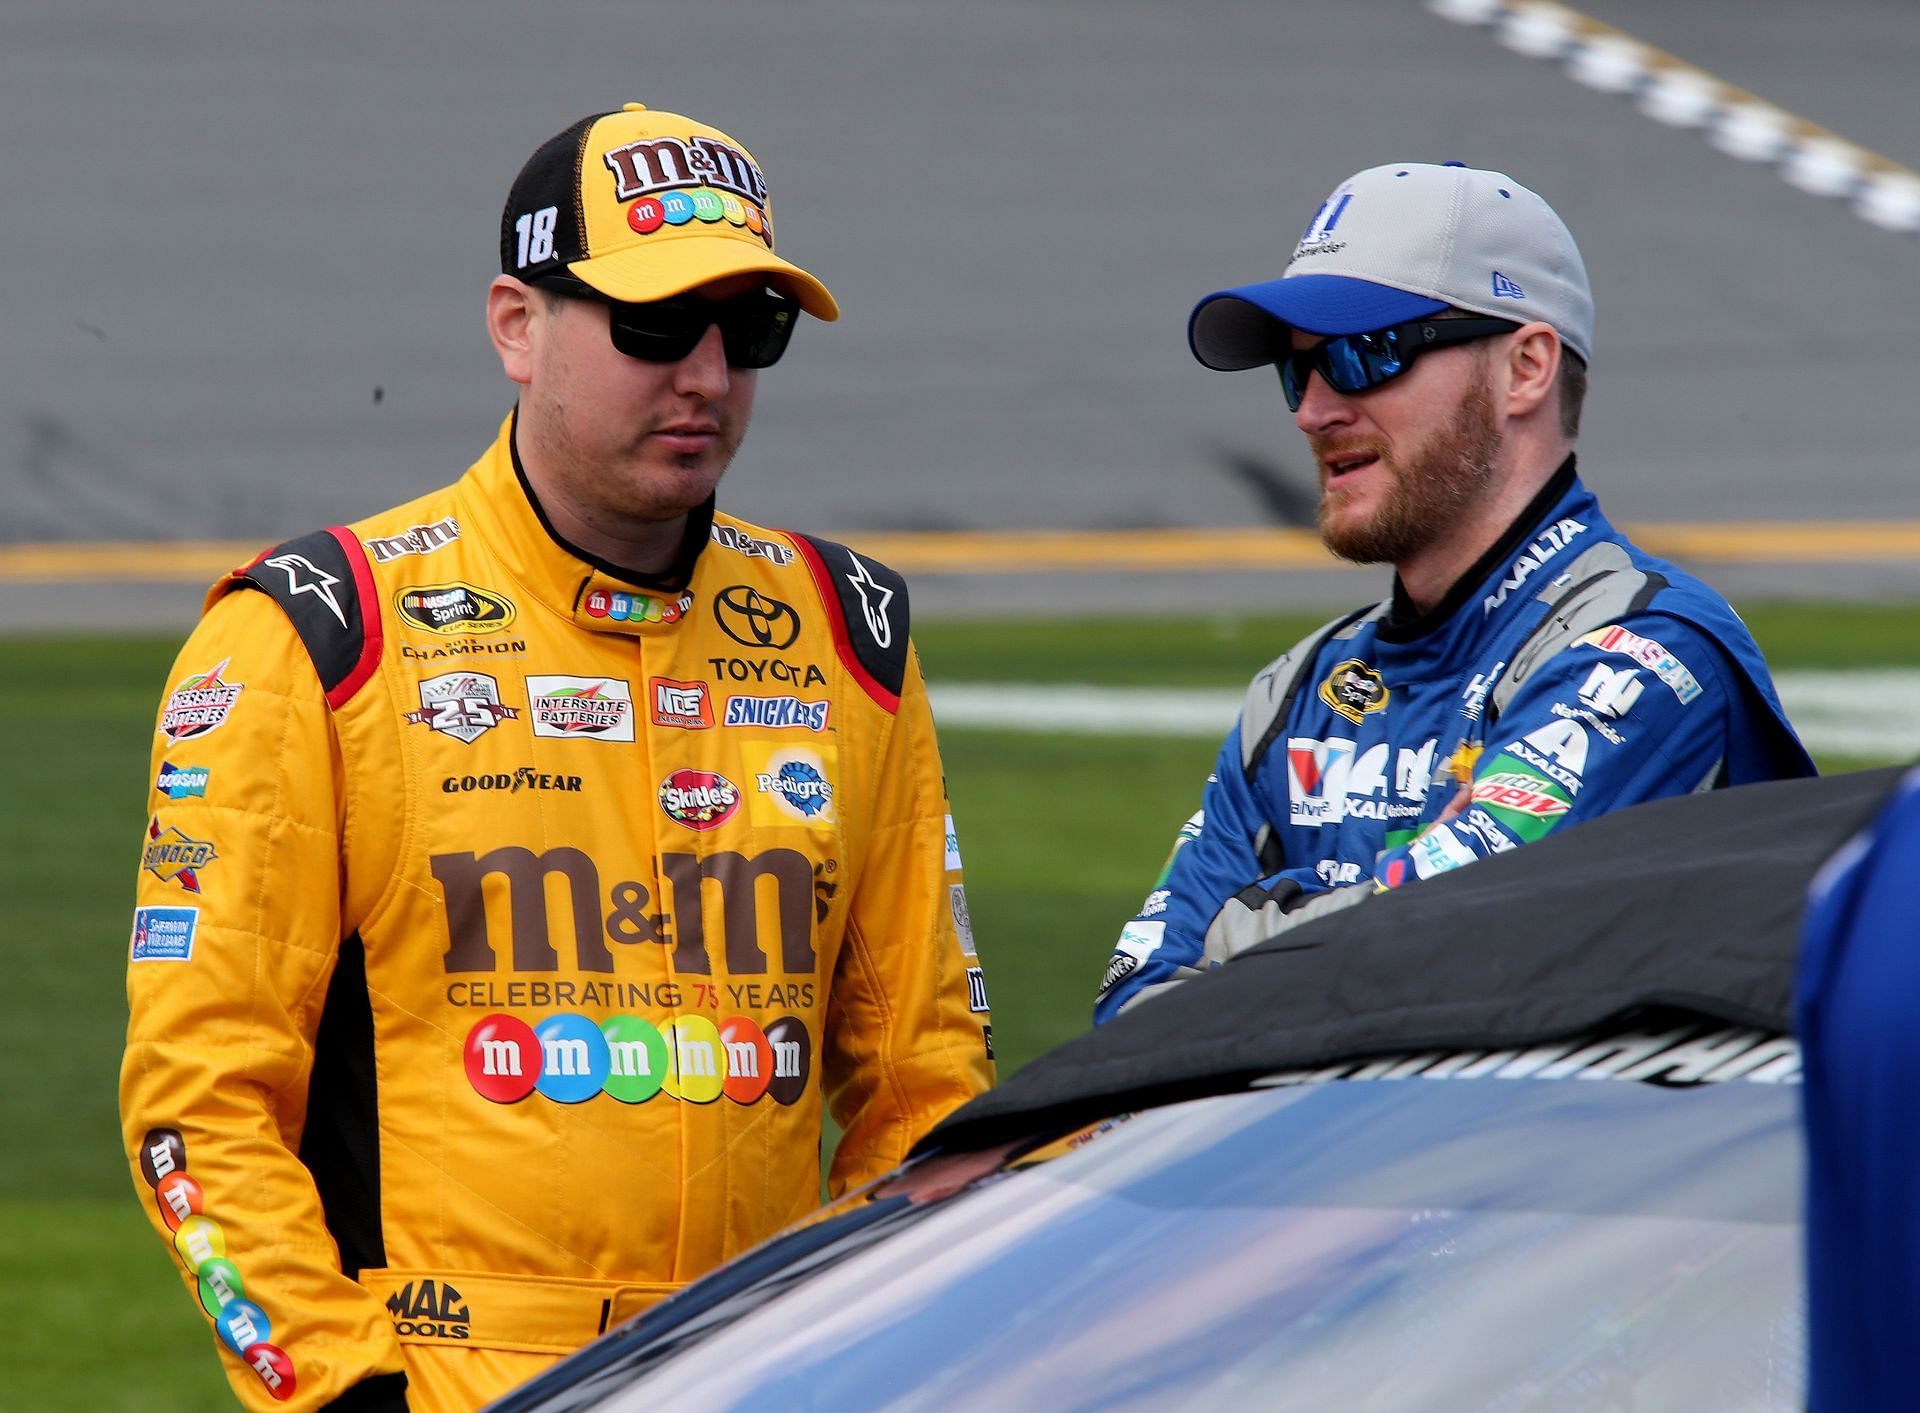 Kyle Busch (left) talks with Dale Earnhardt Jr. (right) on the grid during the 2016 NASCAR Sprint Cup Series Daytona 500 (Photo by Jerry Markland/Getty Images)